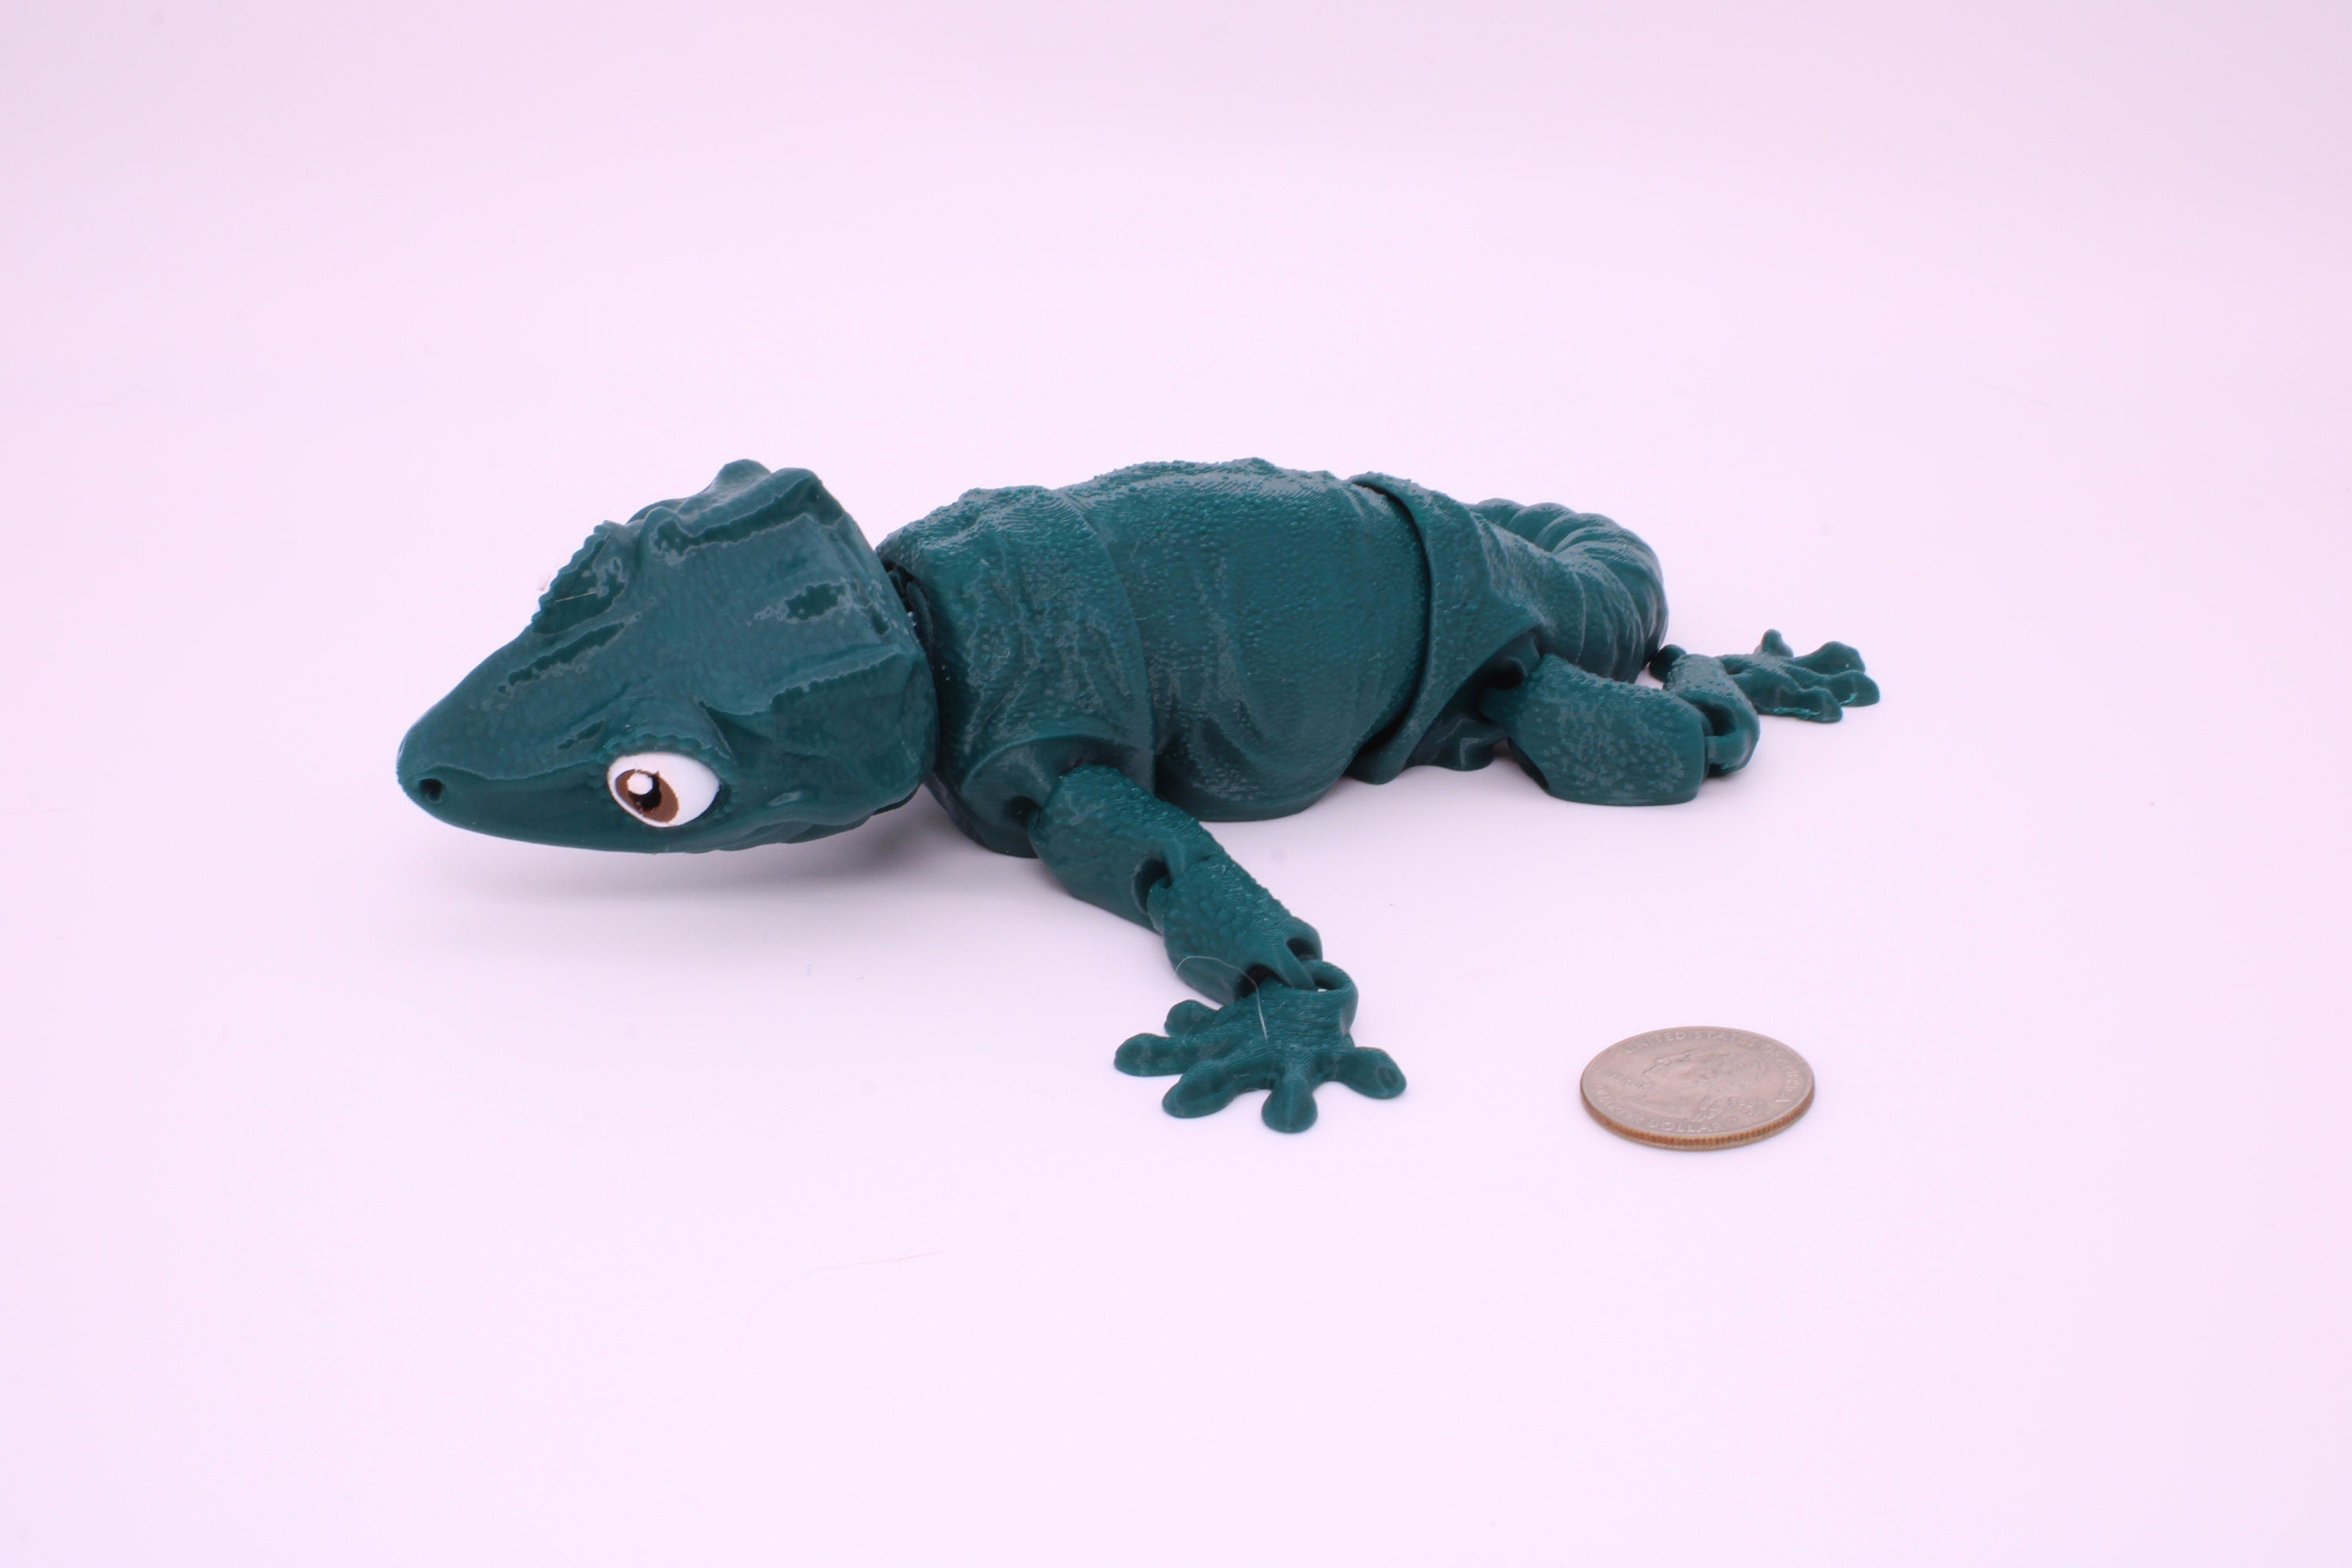 Gargoyle Gecko - Green with colored eyes | Flexi Toy | Articulating Fidget Toy | Made to Order